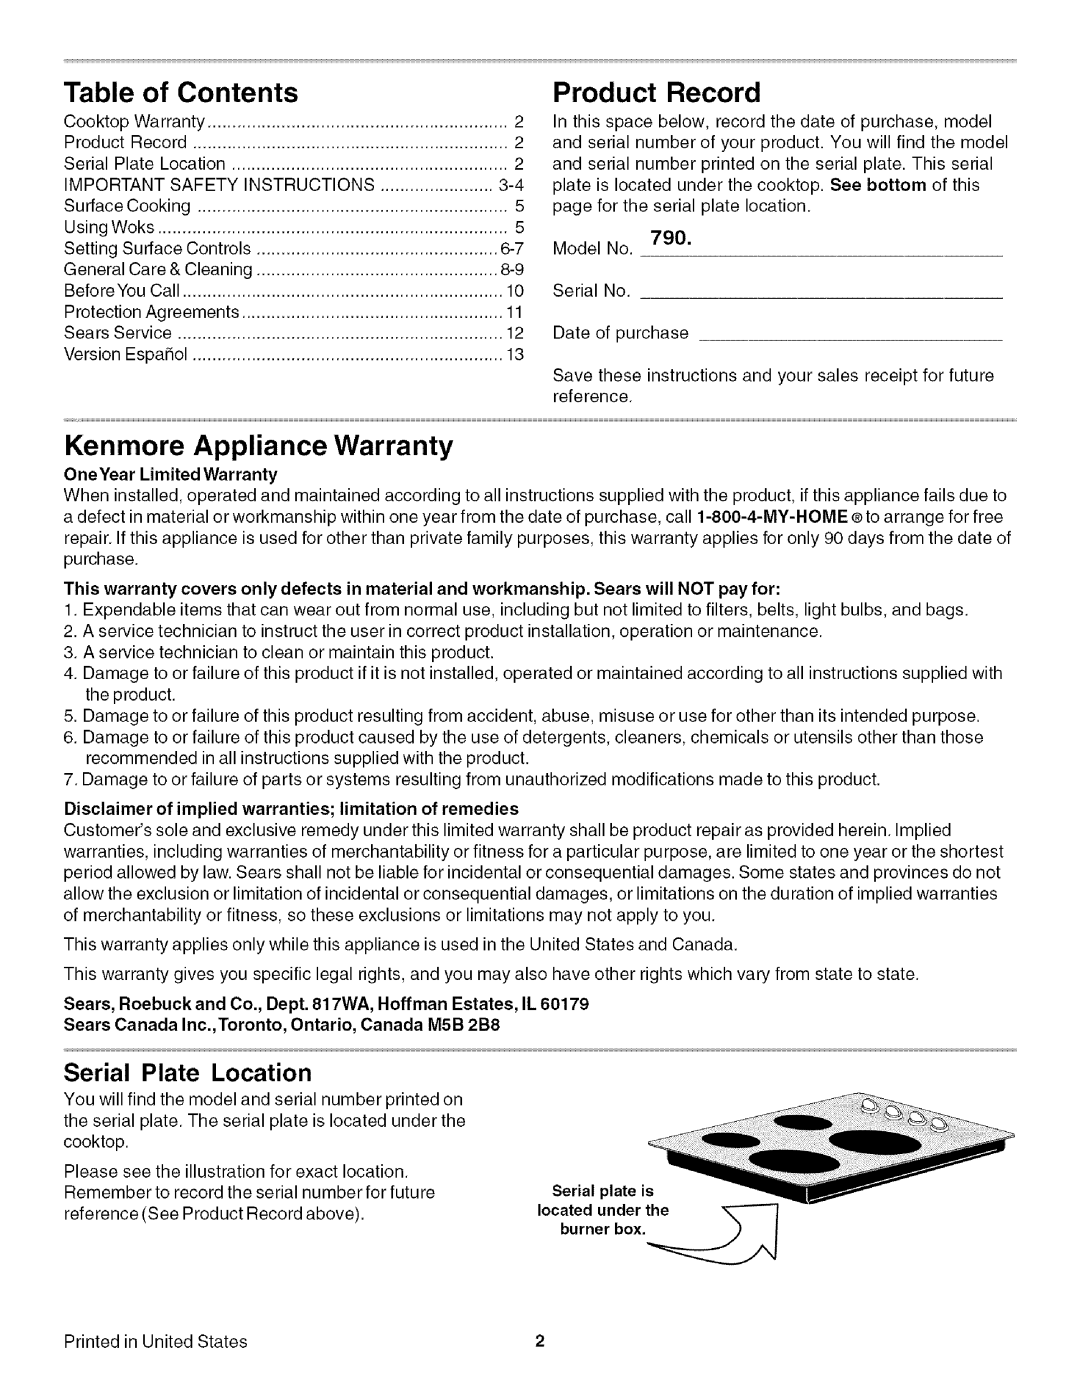 Kenmore 790, 4272 manual of Contents, Record, Kenmore Appliance Warranty, Serial Plate Location, Product 